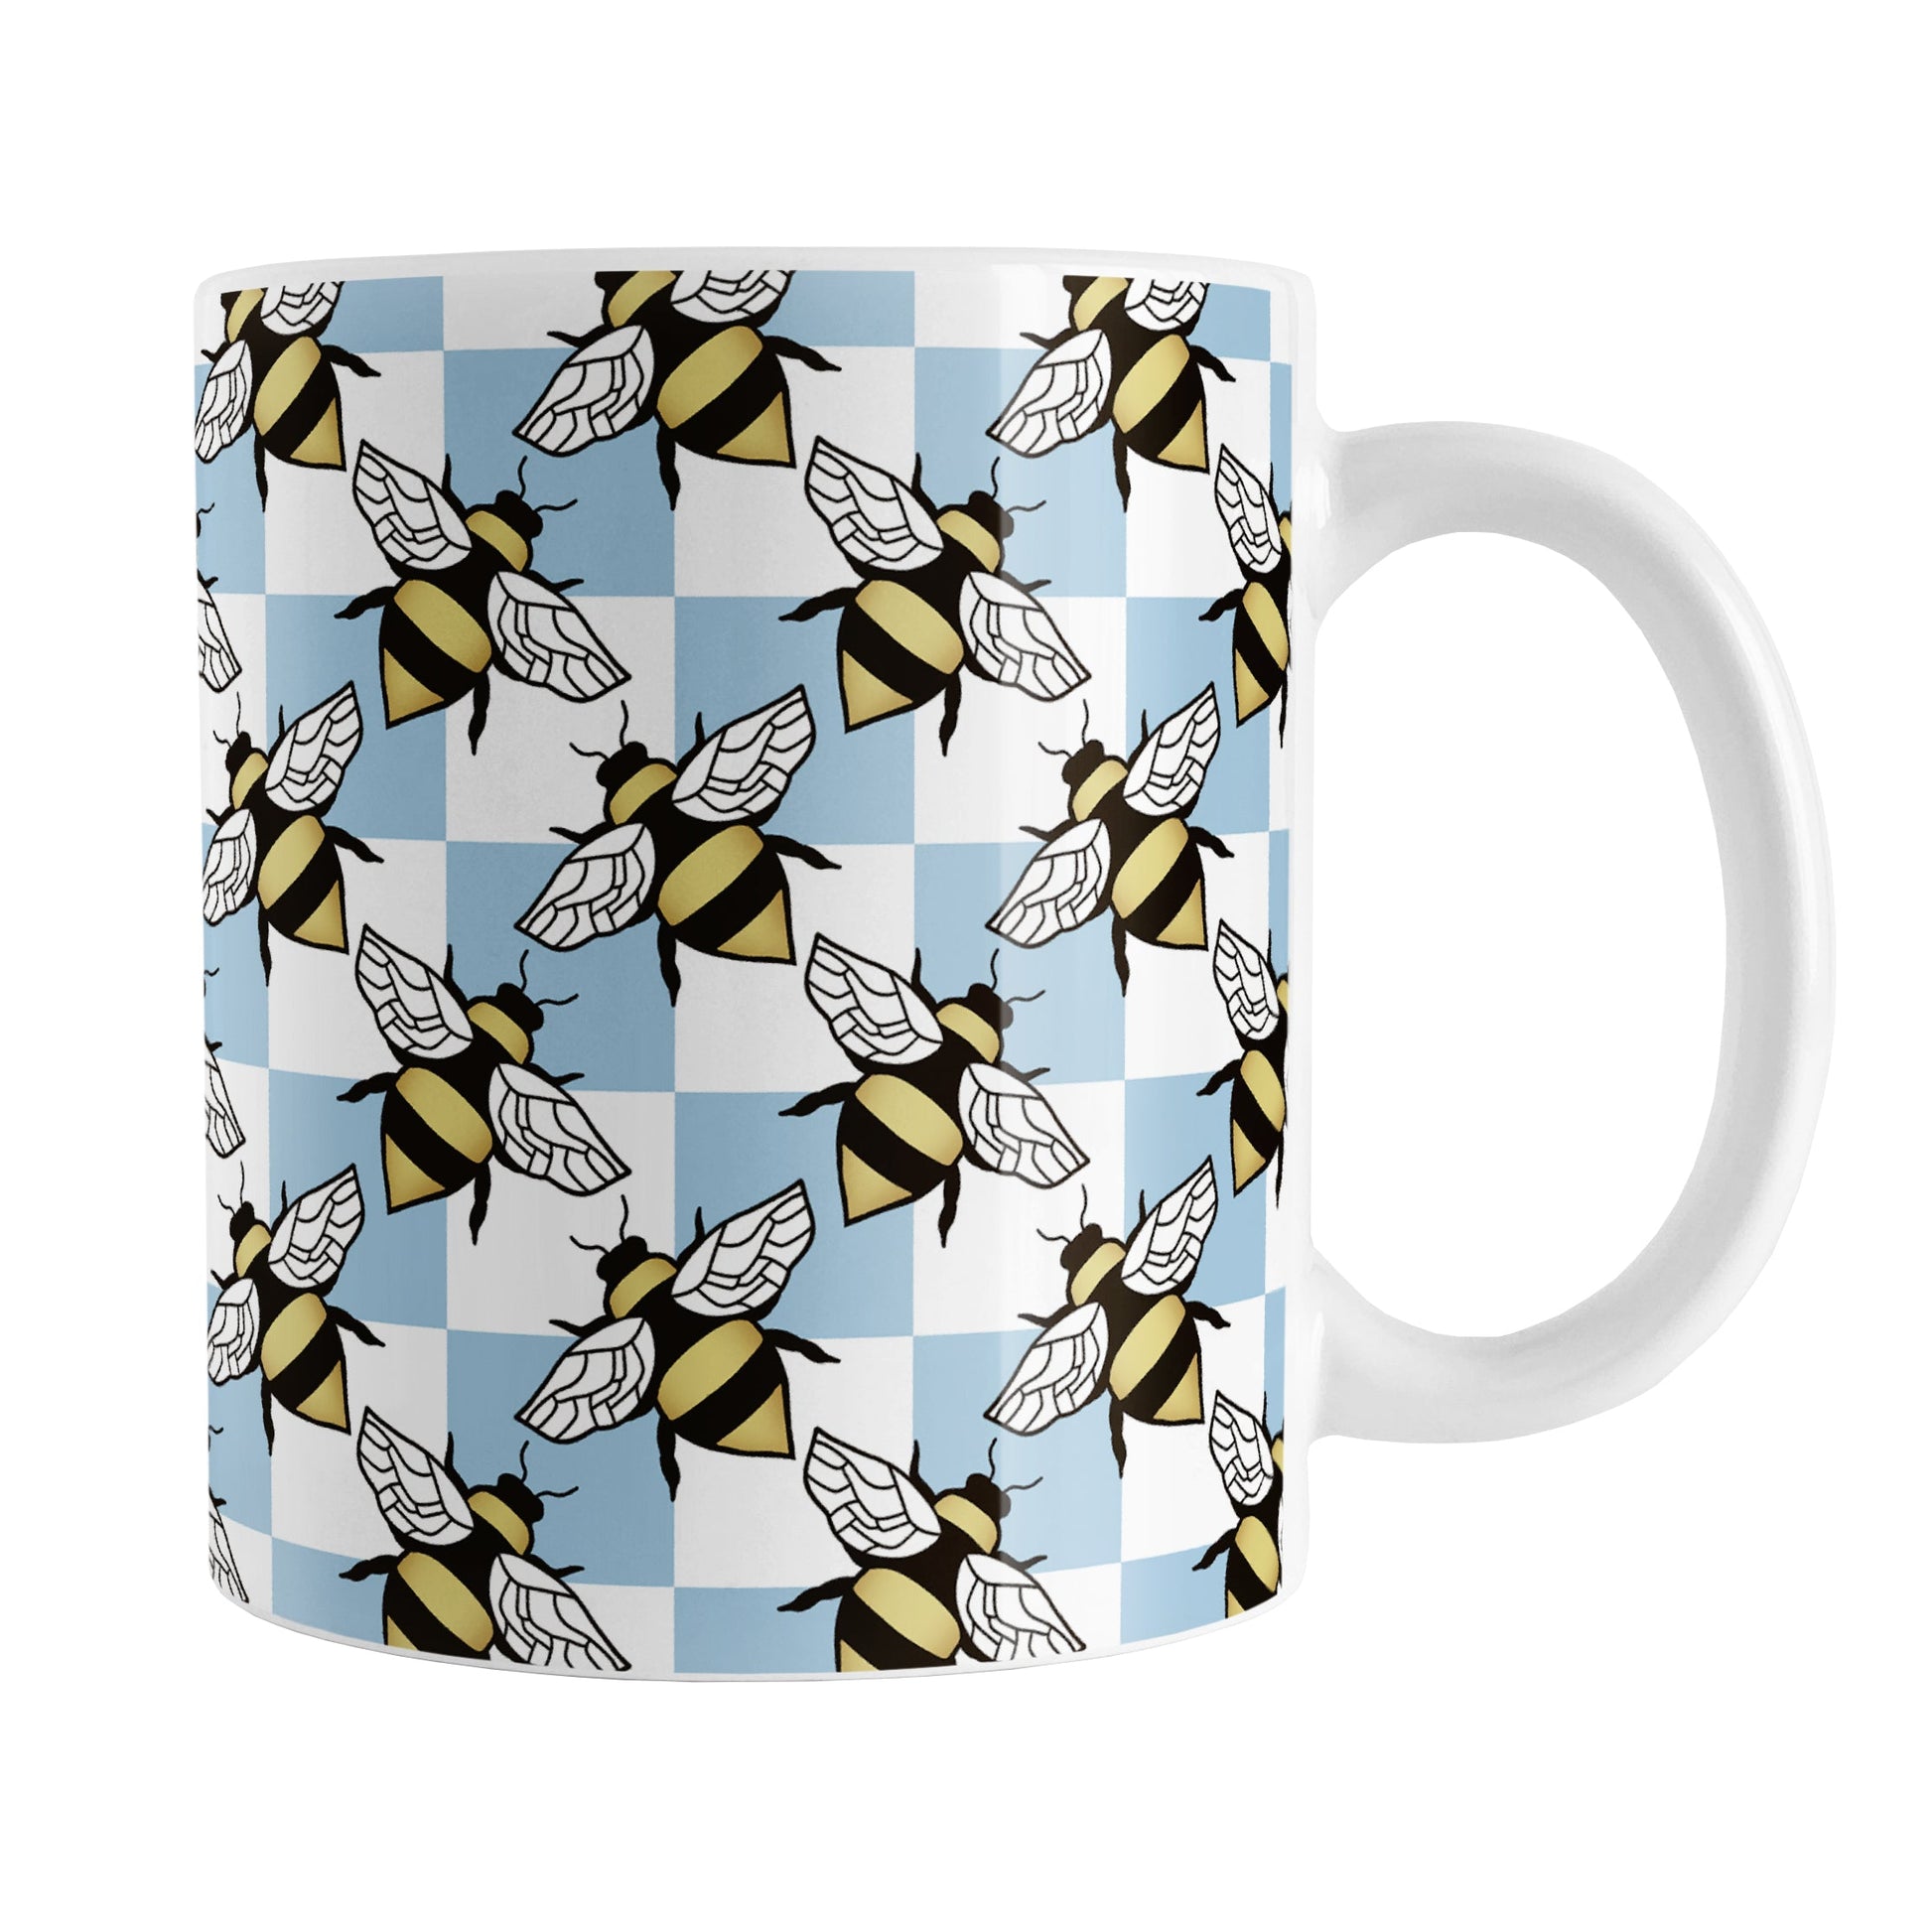 Blue Checkered Bee Mug (11oz) at Amy's Coffee Mugs. A ceramic coffee mug designed with a blue and white checkered pattern adorned with alternately facing bees over the check pattern. This design wraps around the mug up to the handle.